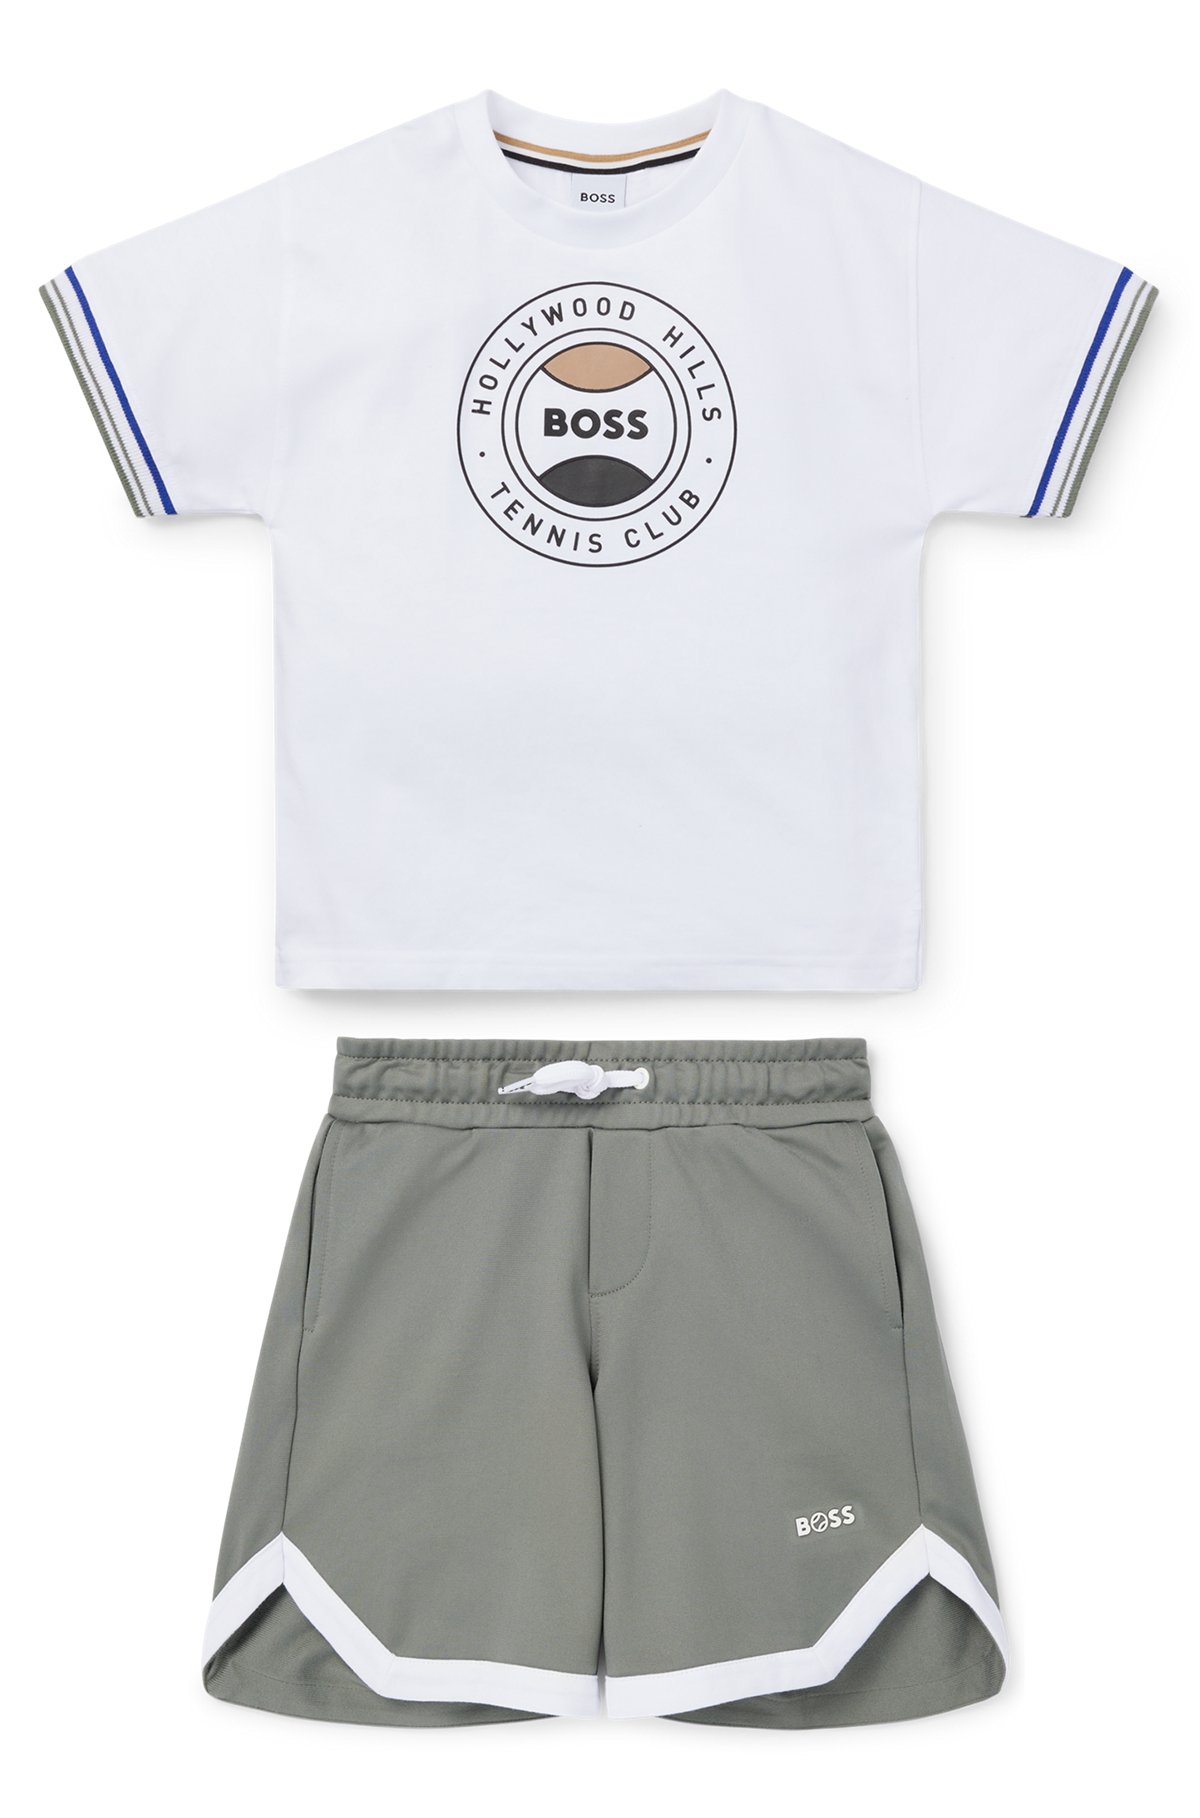 BOSS - Kids' shorts and T-shirt set with tennnis-inspired artwork